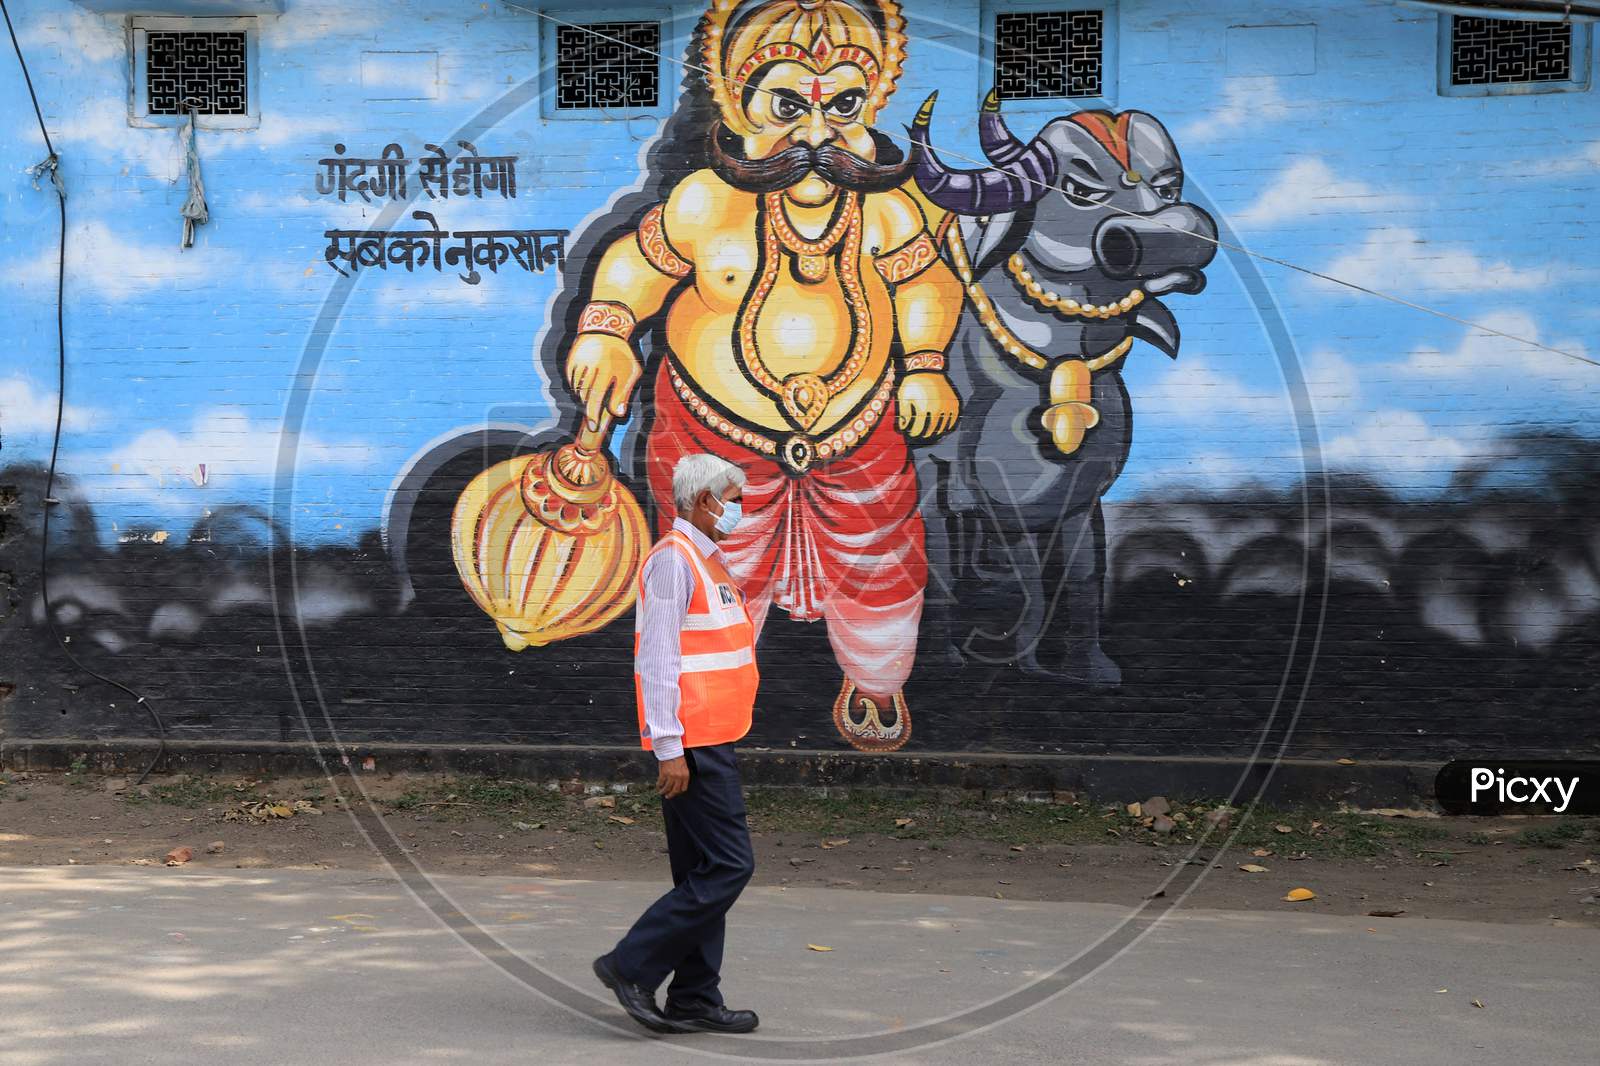 A Railway Employee Walk In Front Of Wall Painting Of Yamraj During A Nationwide Lockdown To Slow The Spreading Of The Coronavirus Disease (Covid-19), In Prayagraj, April, 17, 2020.